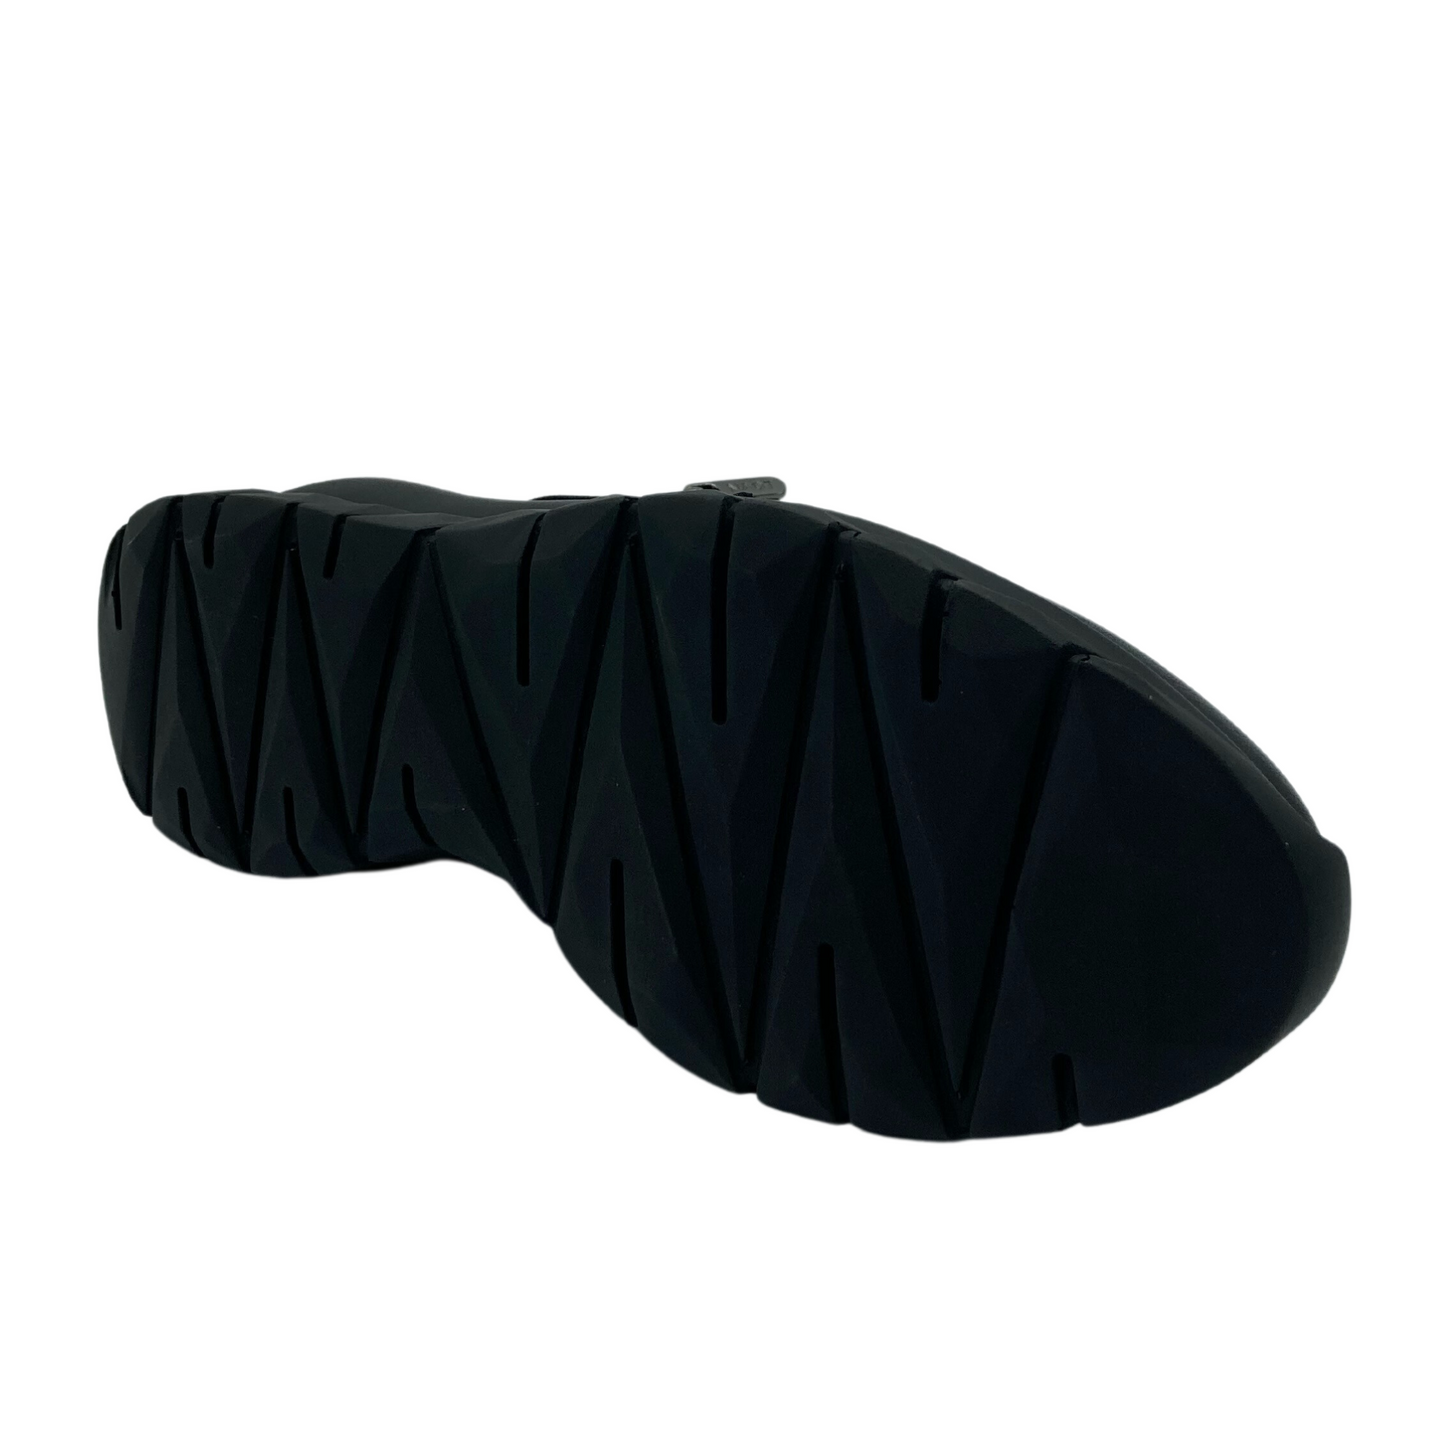 Bottom view of black leather sneaker with black slip resistant outsole